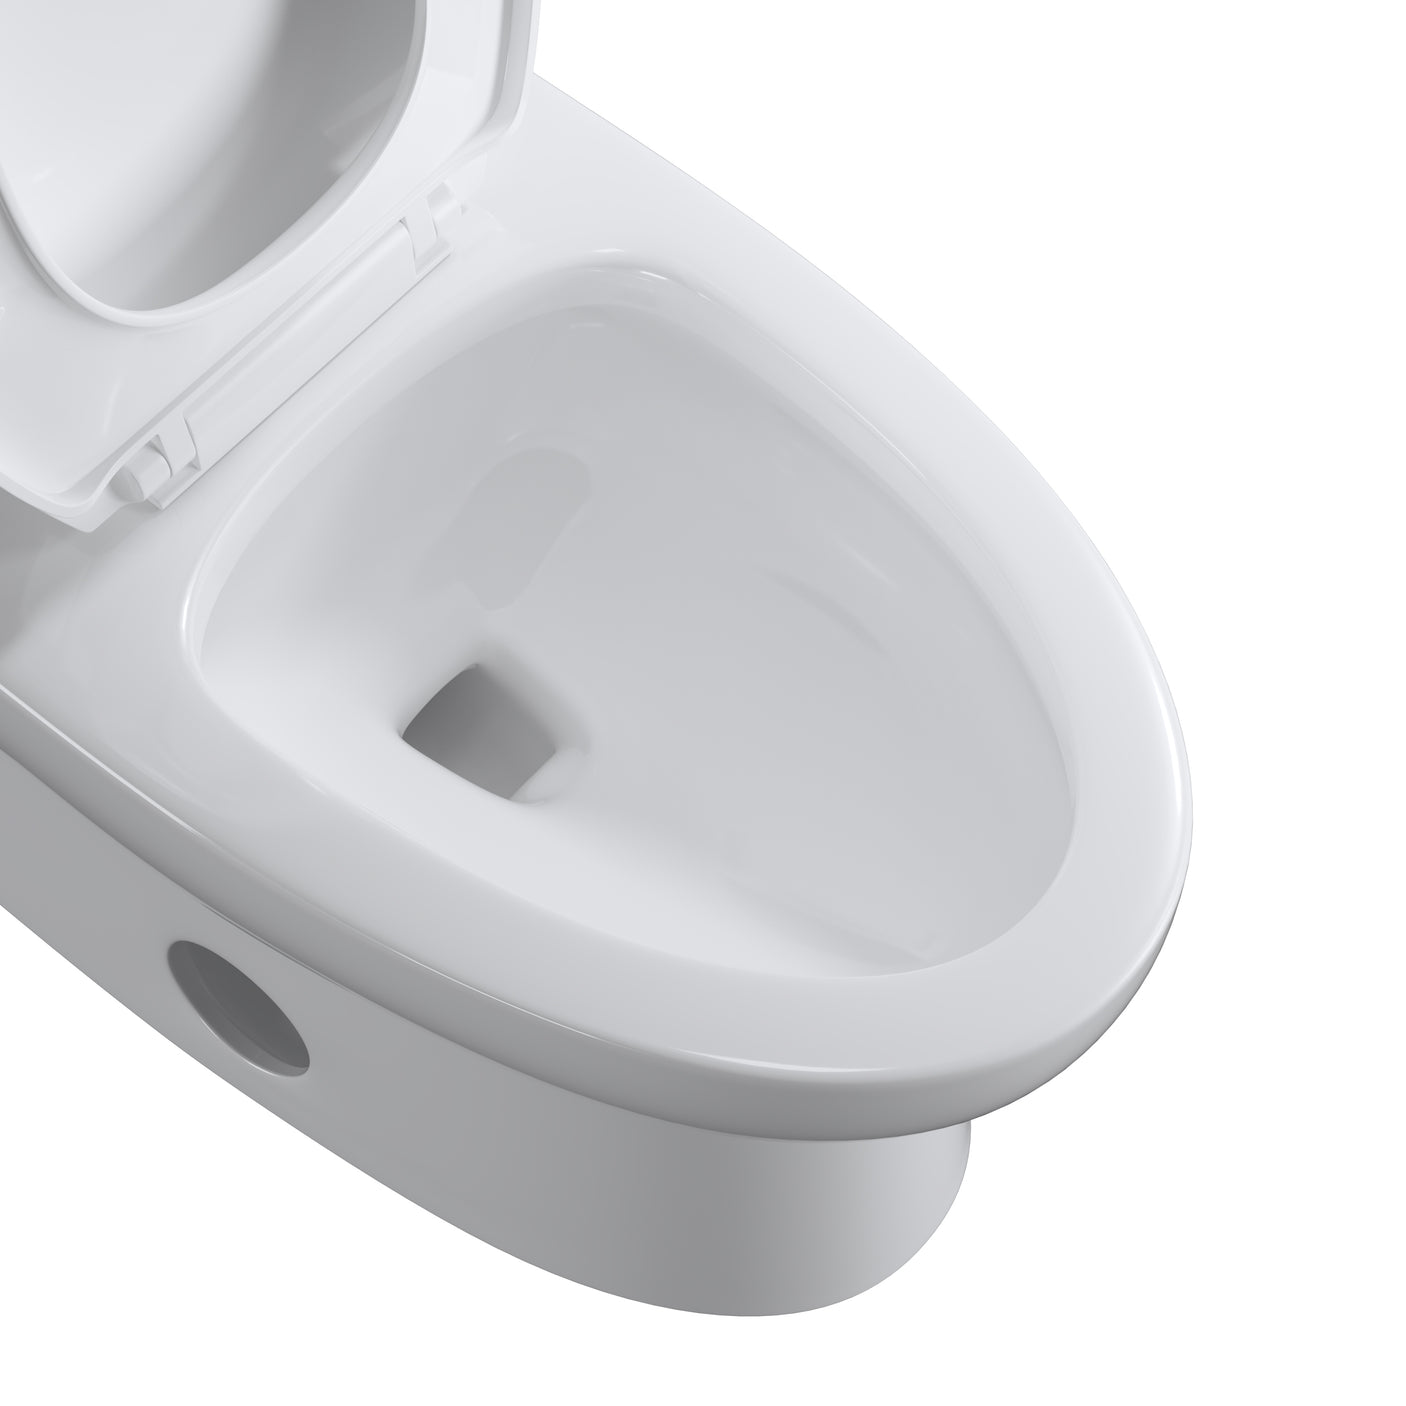 Powerful & Quiet Dual Flush Modern One Piece Toilet with Soft Closing Seat